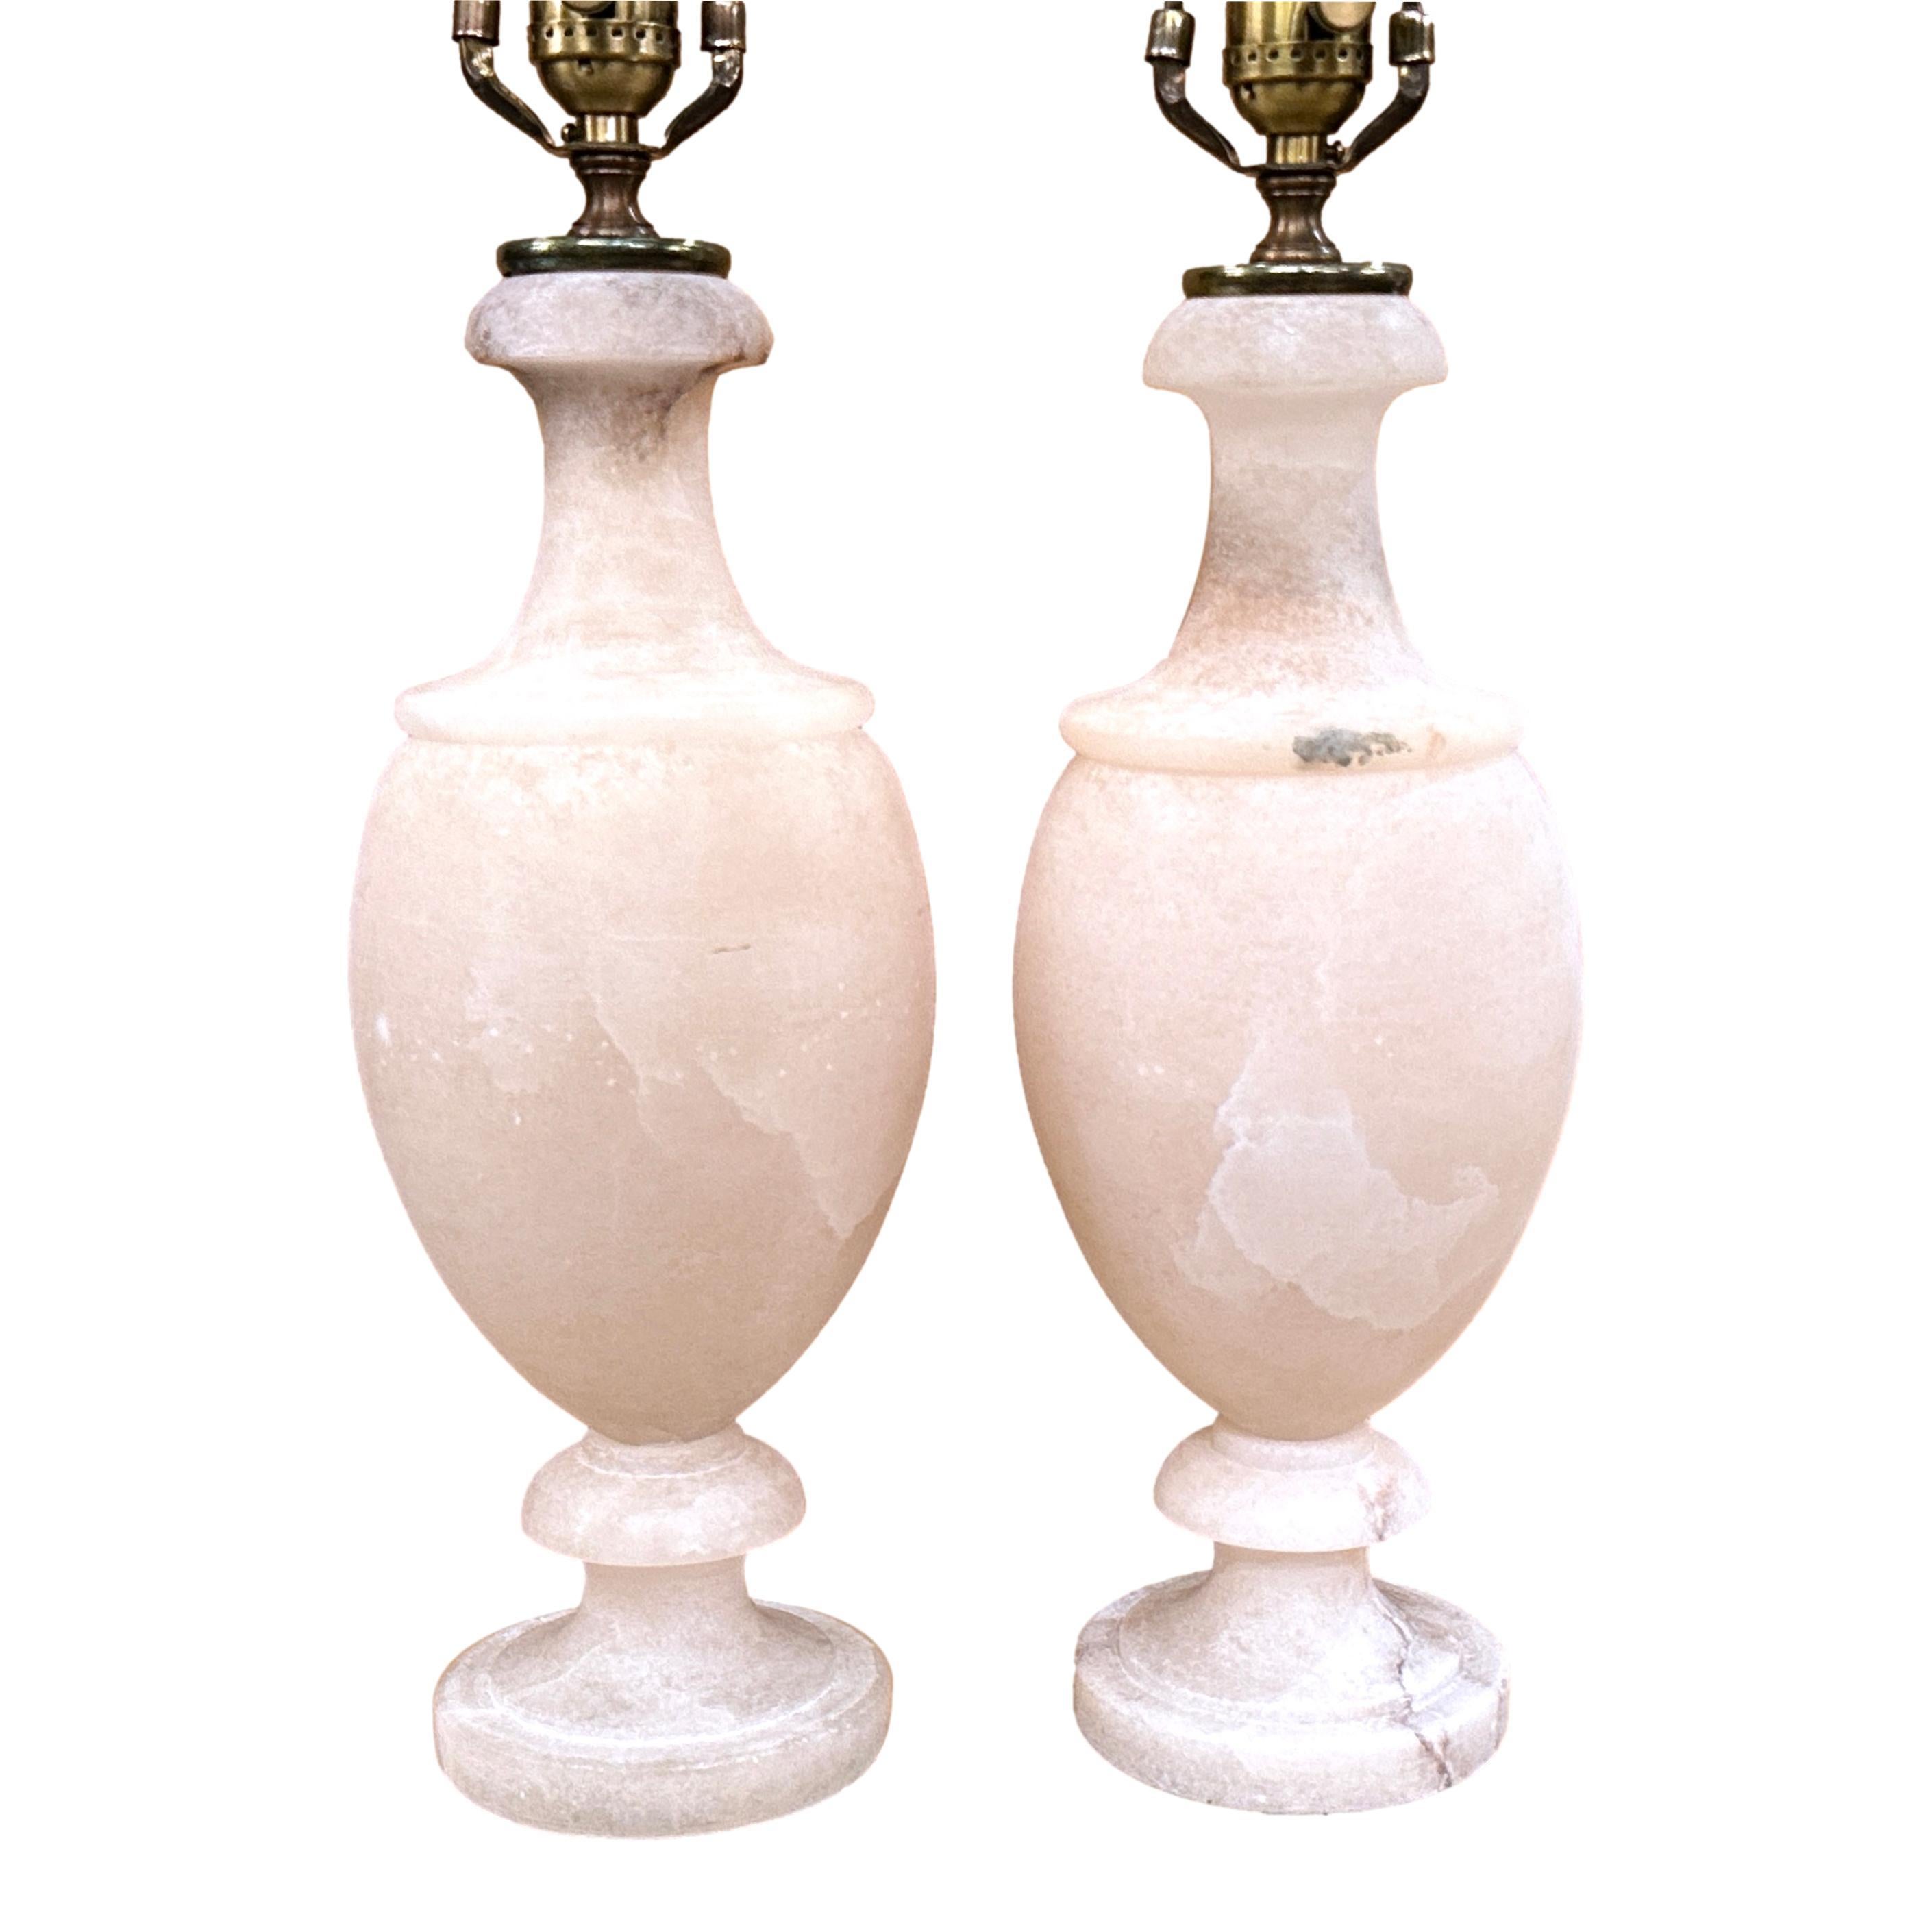 Pair of circa 1960's neoclassic Italian carved alabaster lamps.

Measurements:
Height of body: 15